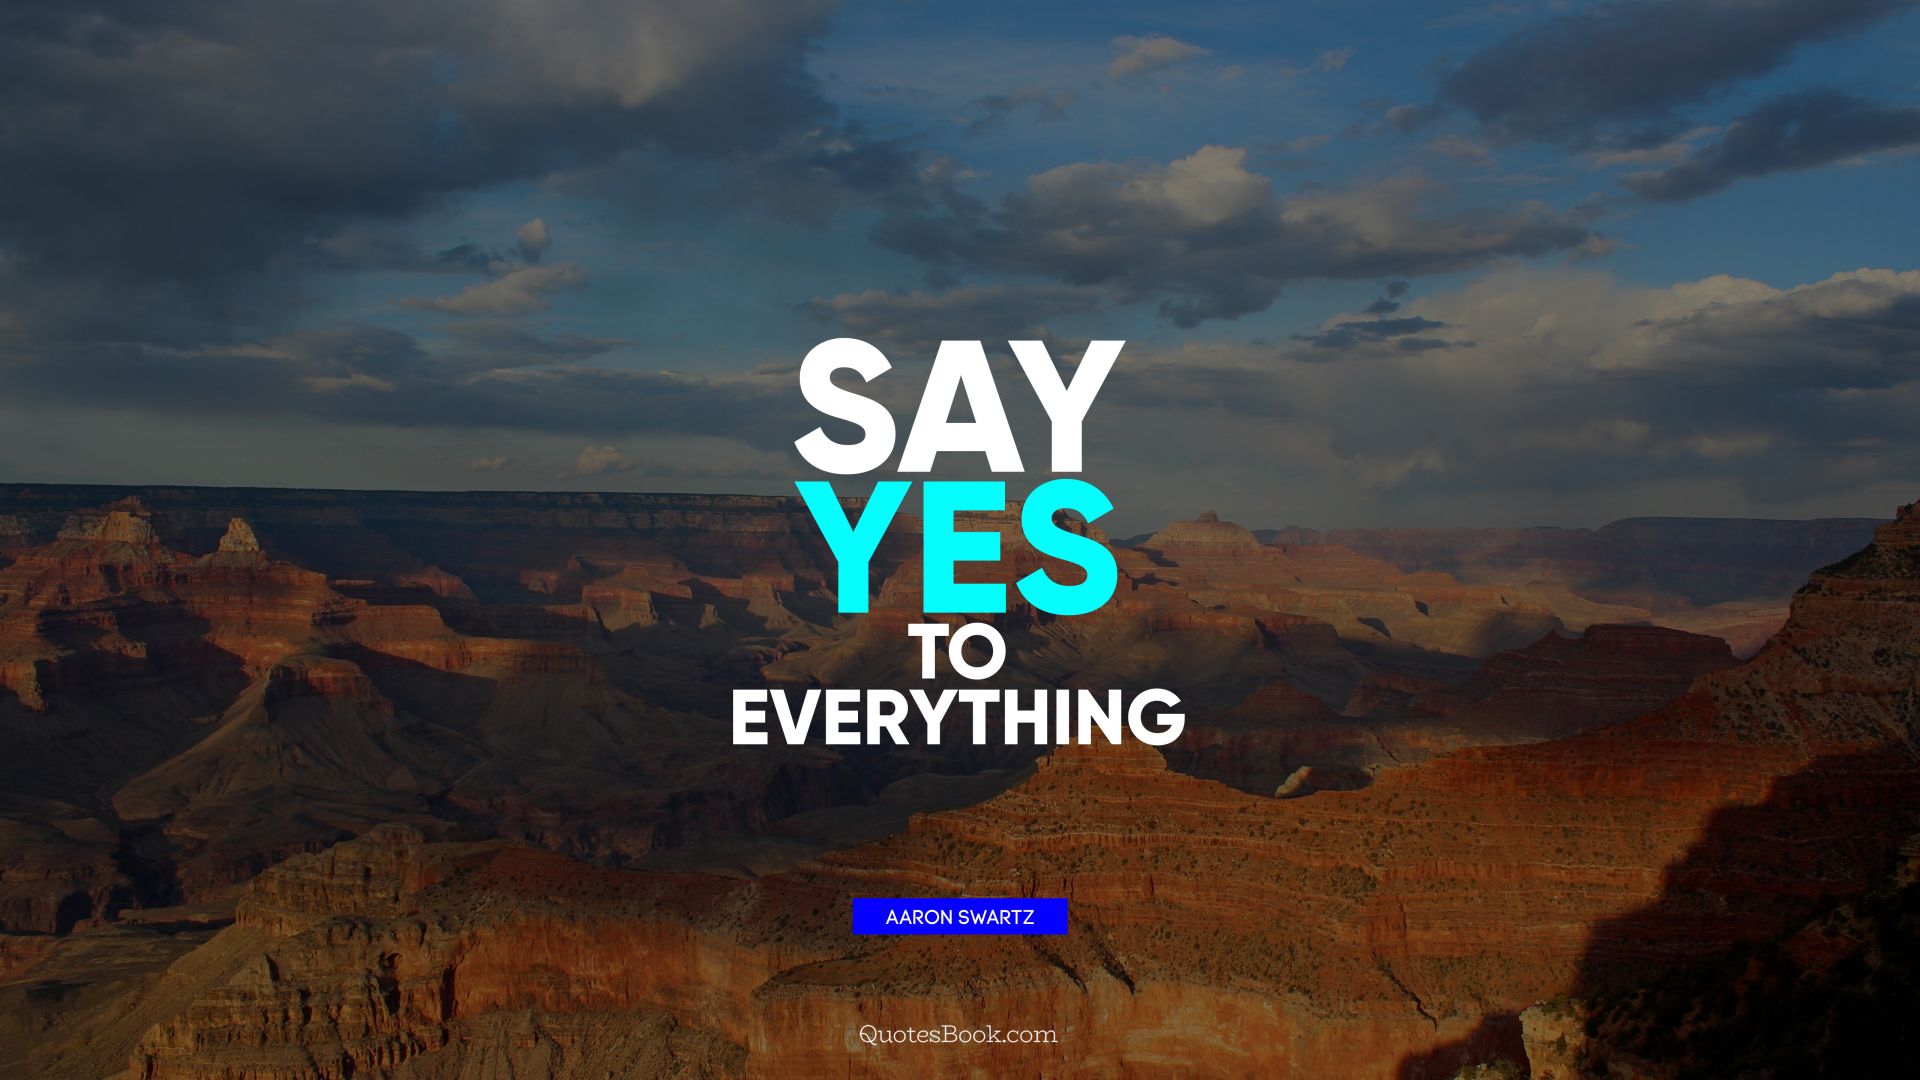 Say yes to everything. - Quote by Aaron Swartz